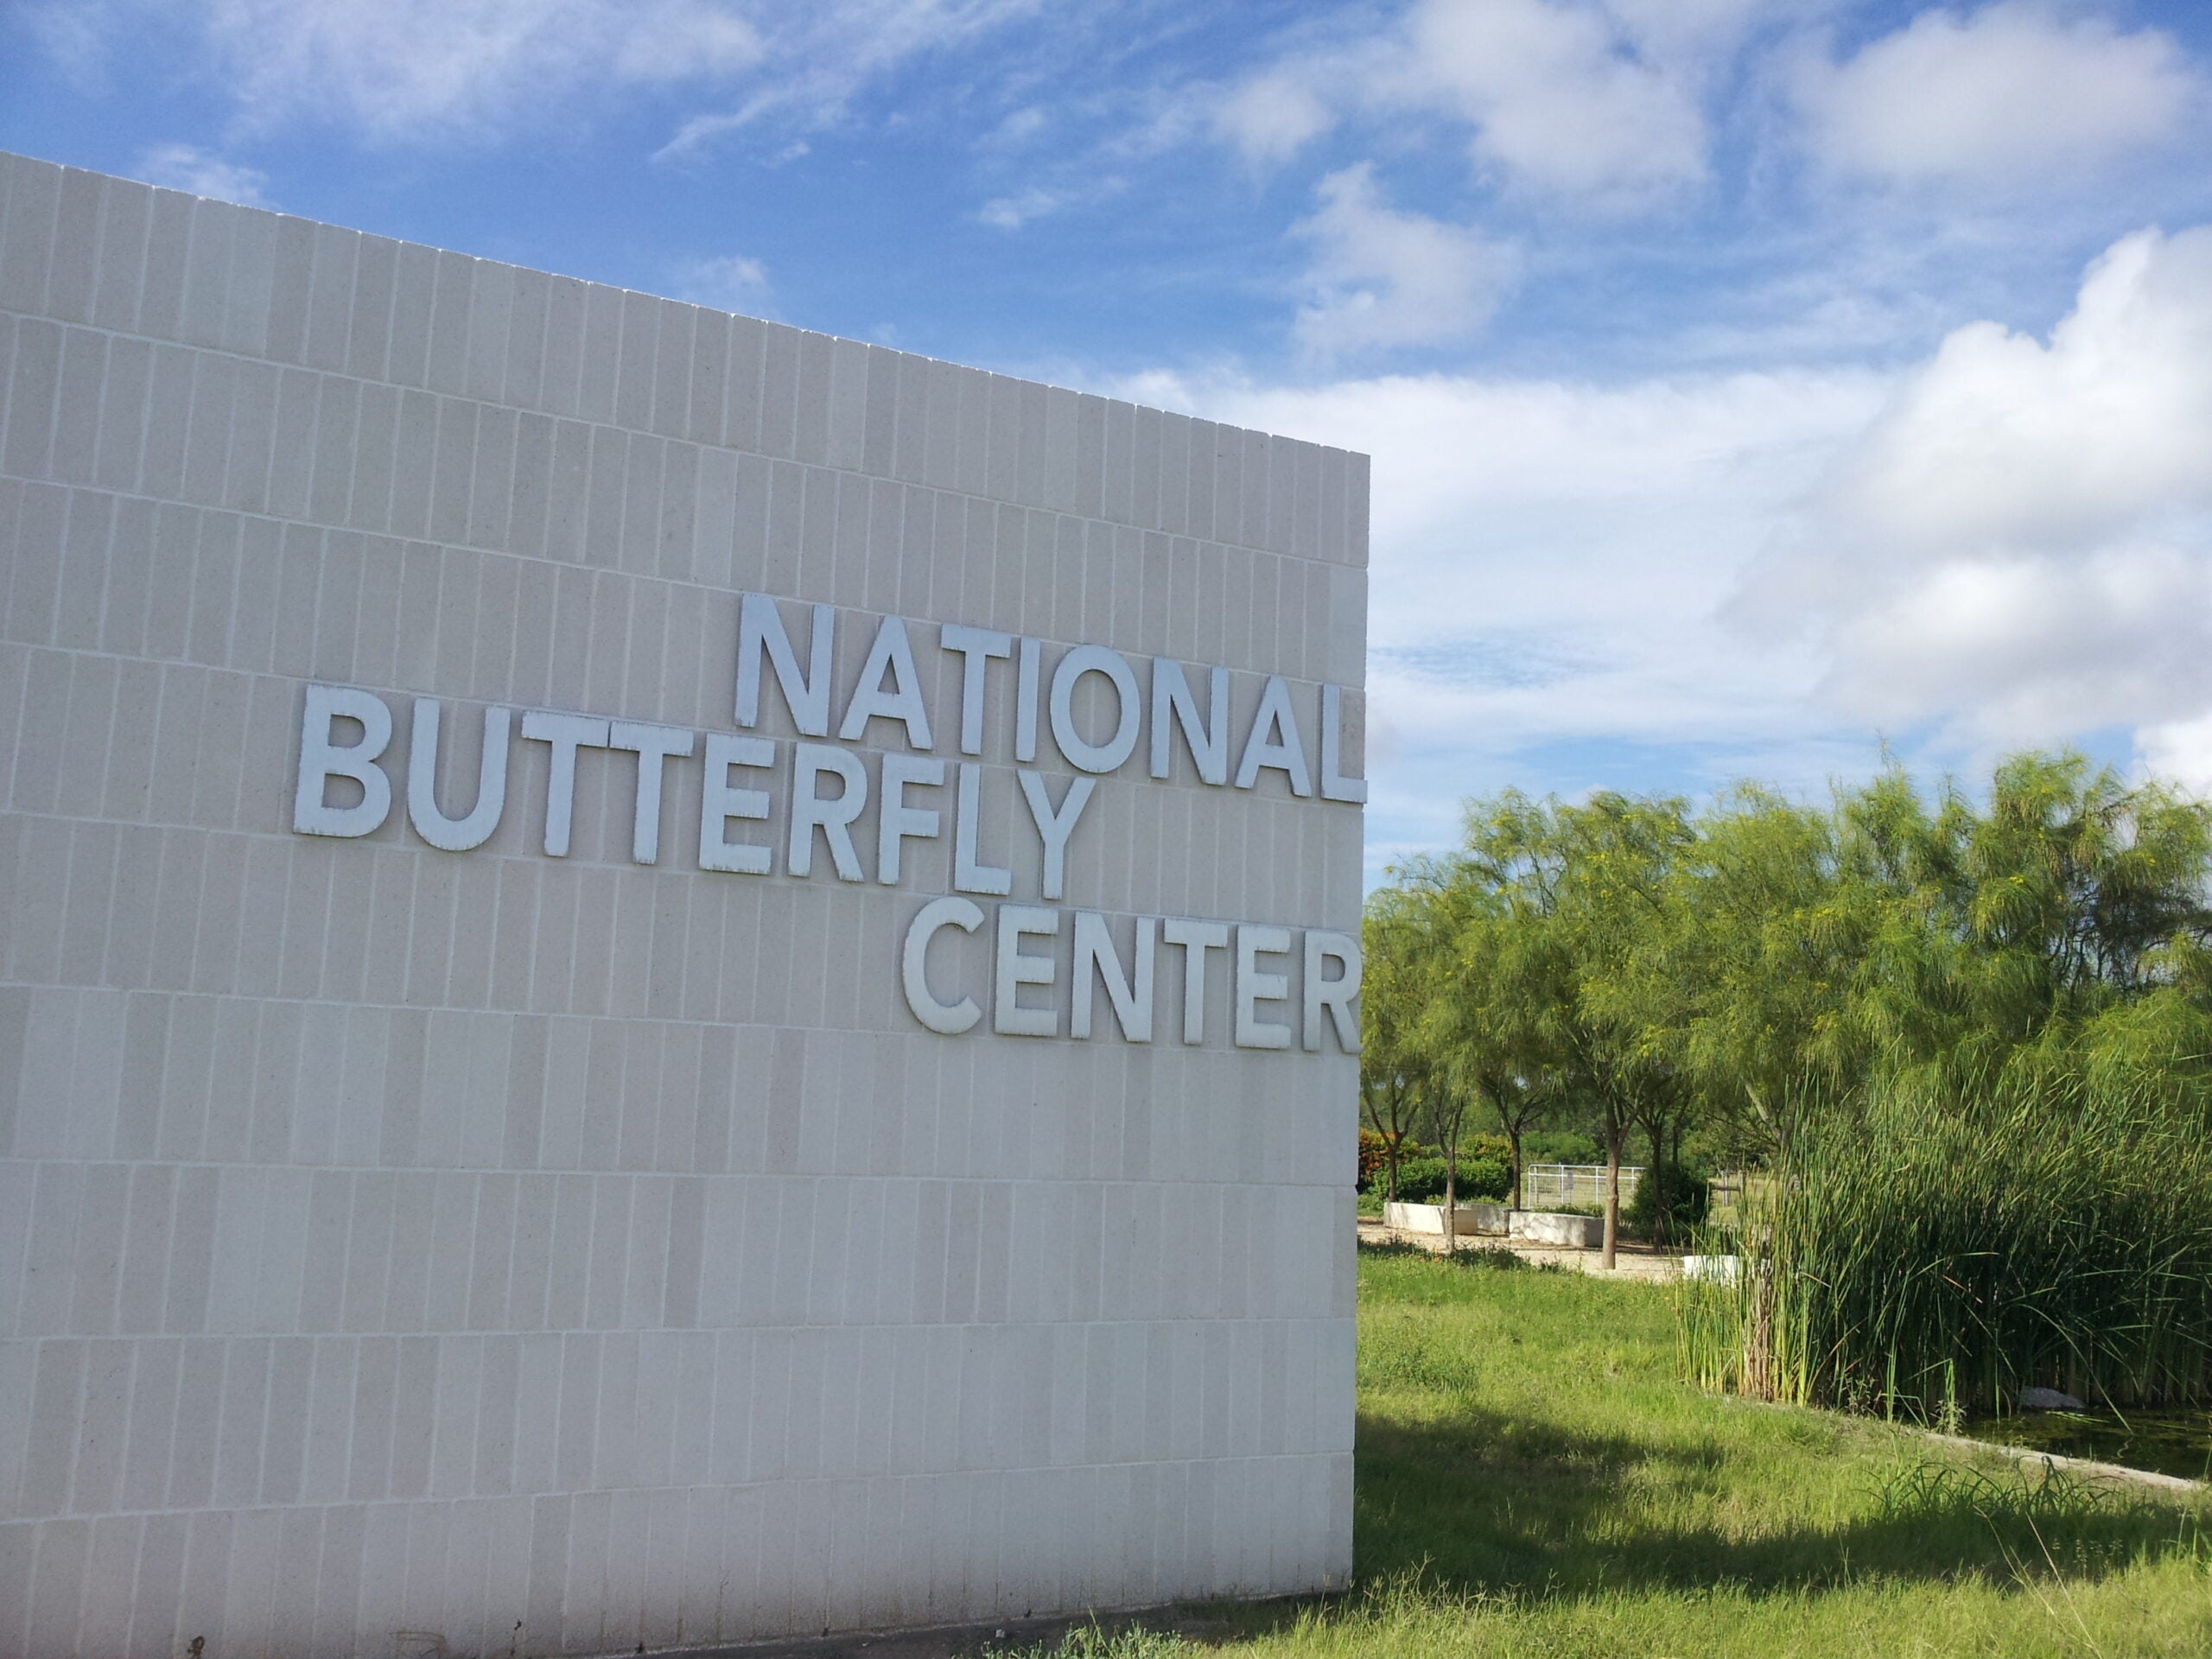 The National Butterfly Center in Mission, Texas, would lose access to parts of their land if the border wall construction is allowed to proceed.